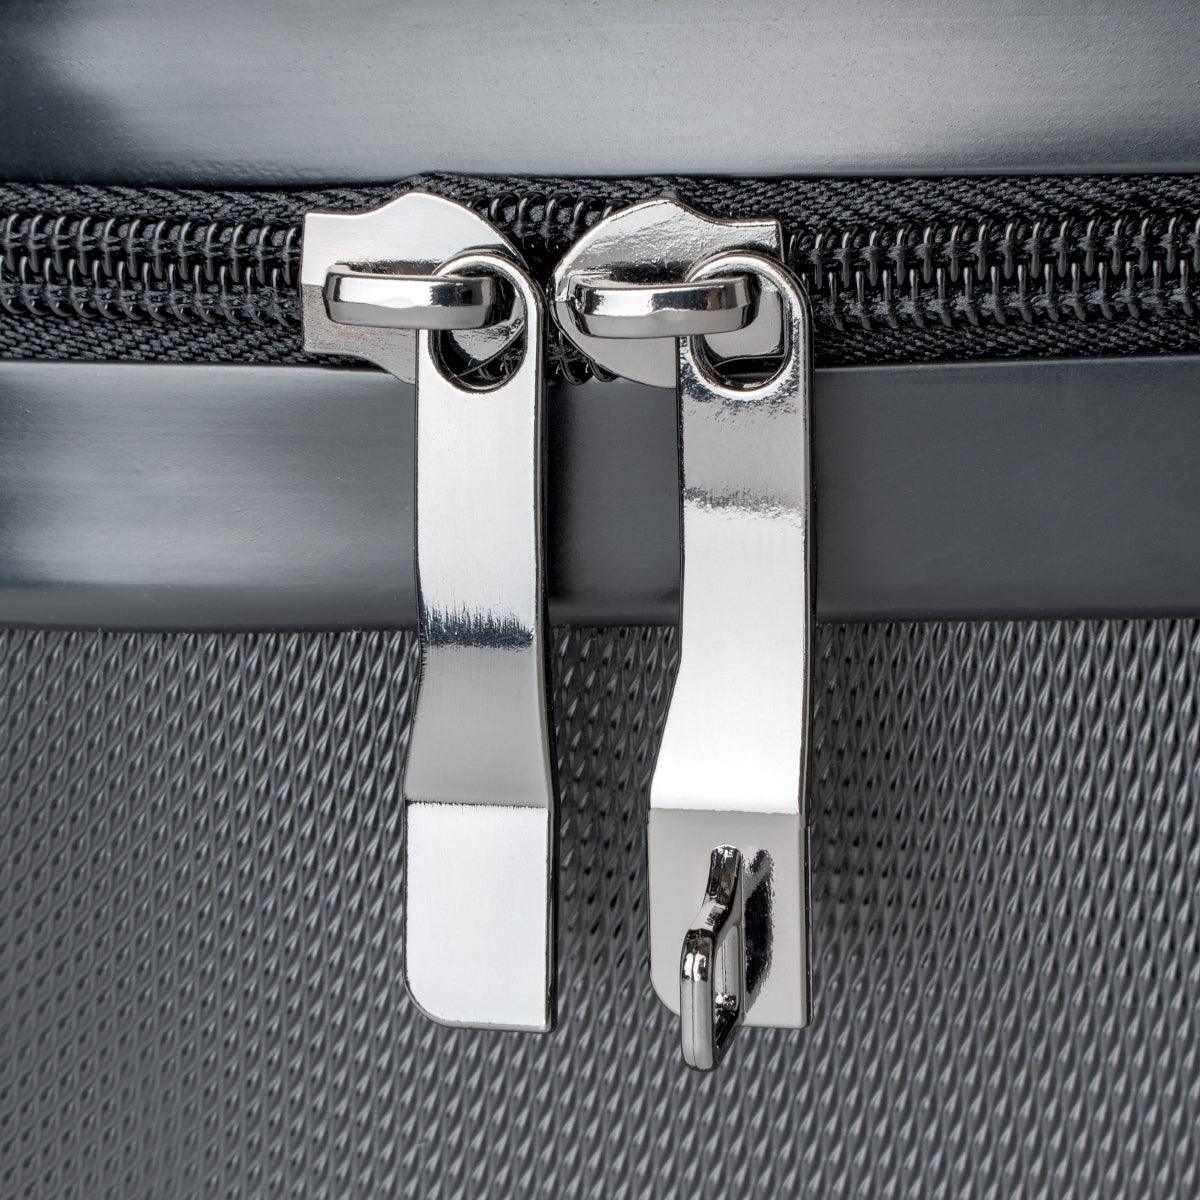 Sameria Luggage Collection - Blissfully Brand